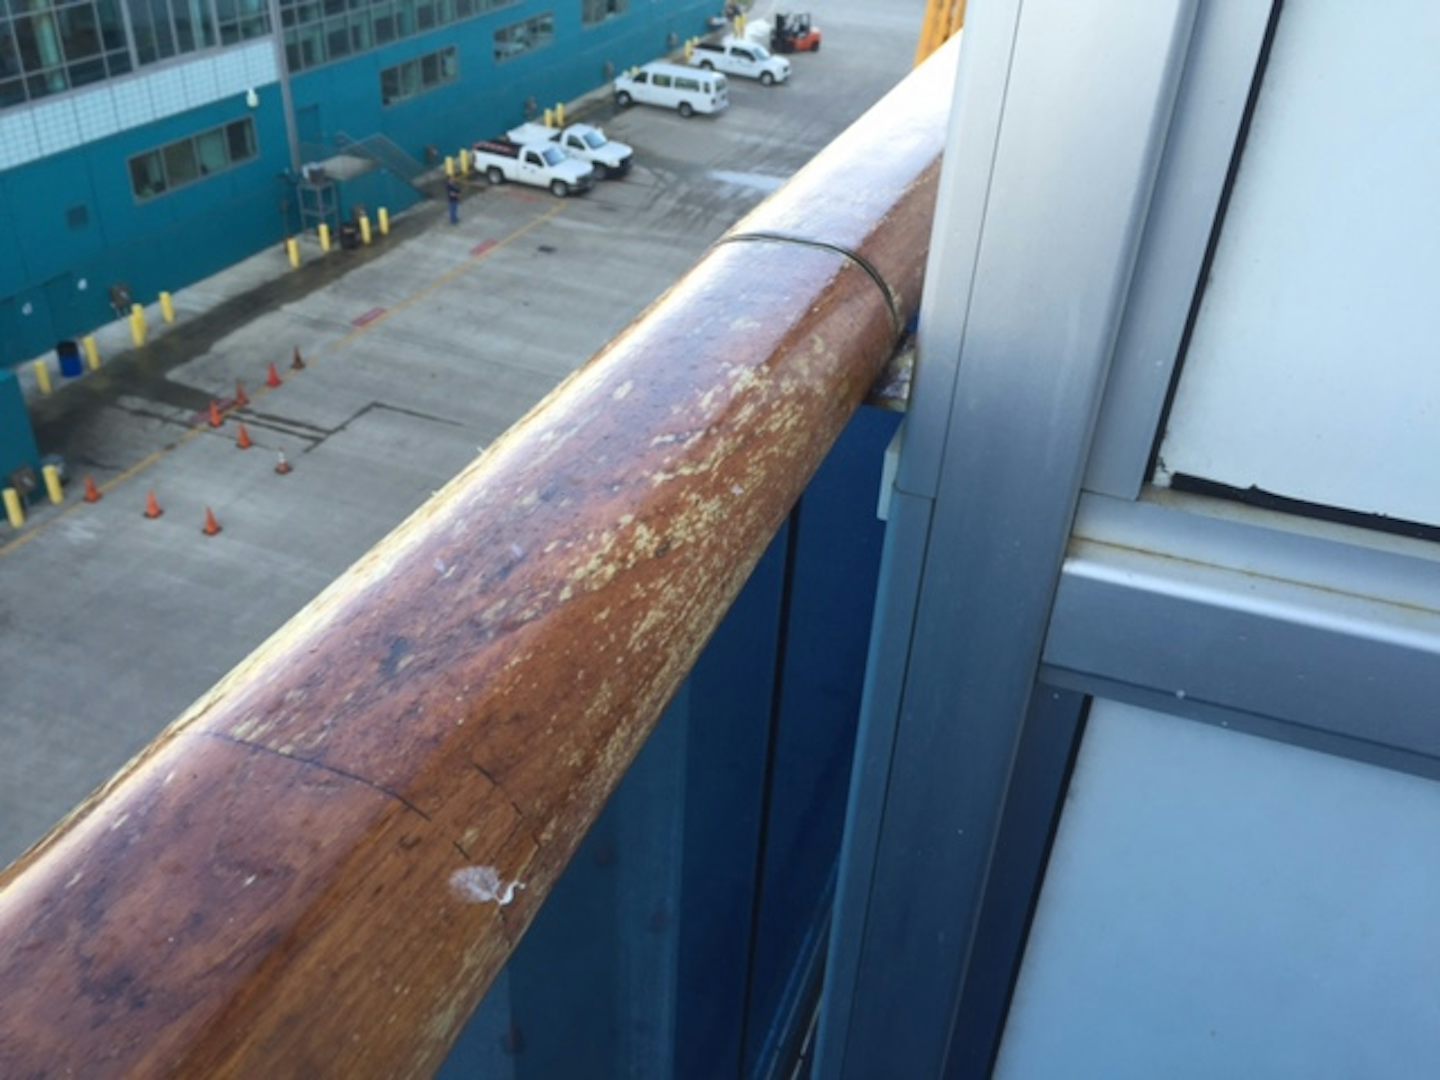 Worn railing.  Not taking care of this once beautiful ship.